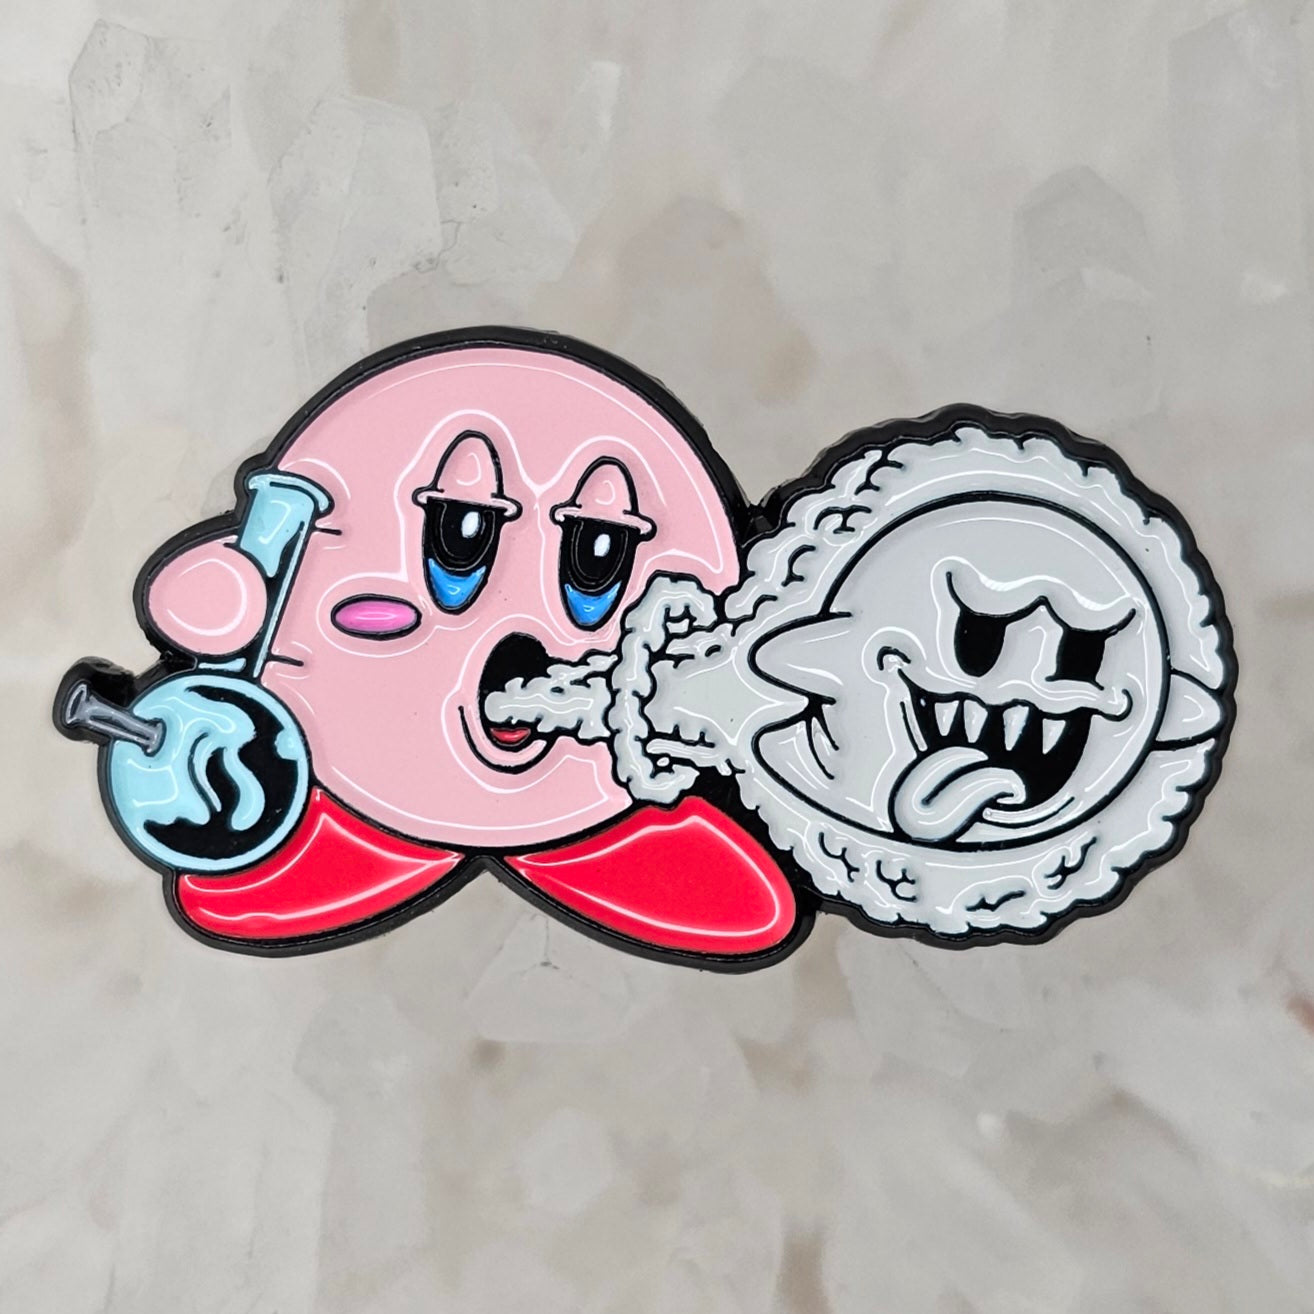 Stoned Kirby Video Game Weed Parody Enamel Pins Hat Pins Lapel Pin Brooch Badge Festival Pin